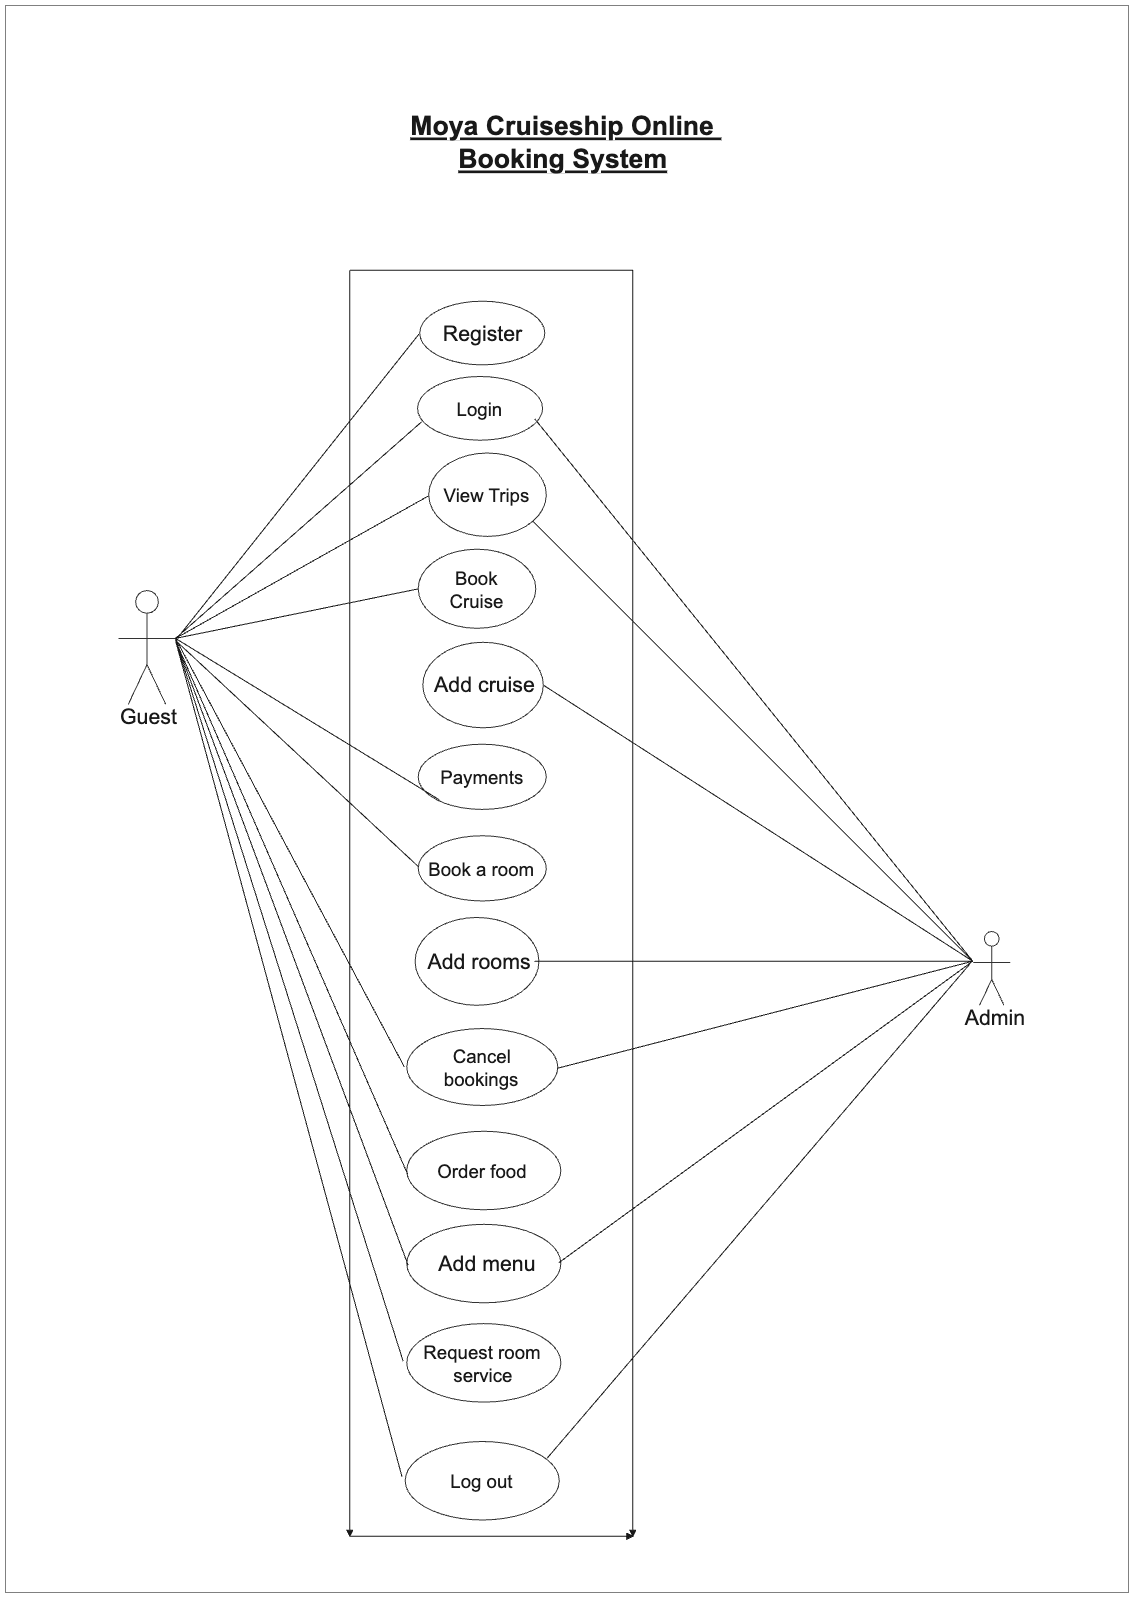 Use Case Diagram for Cruise Online Booking System